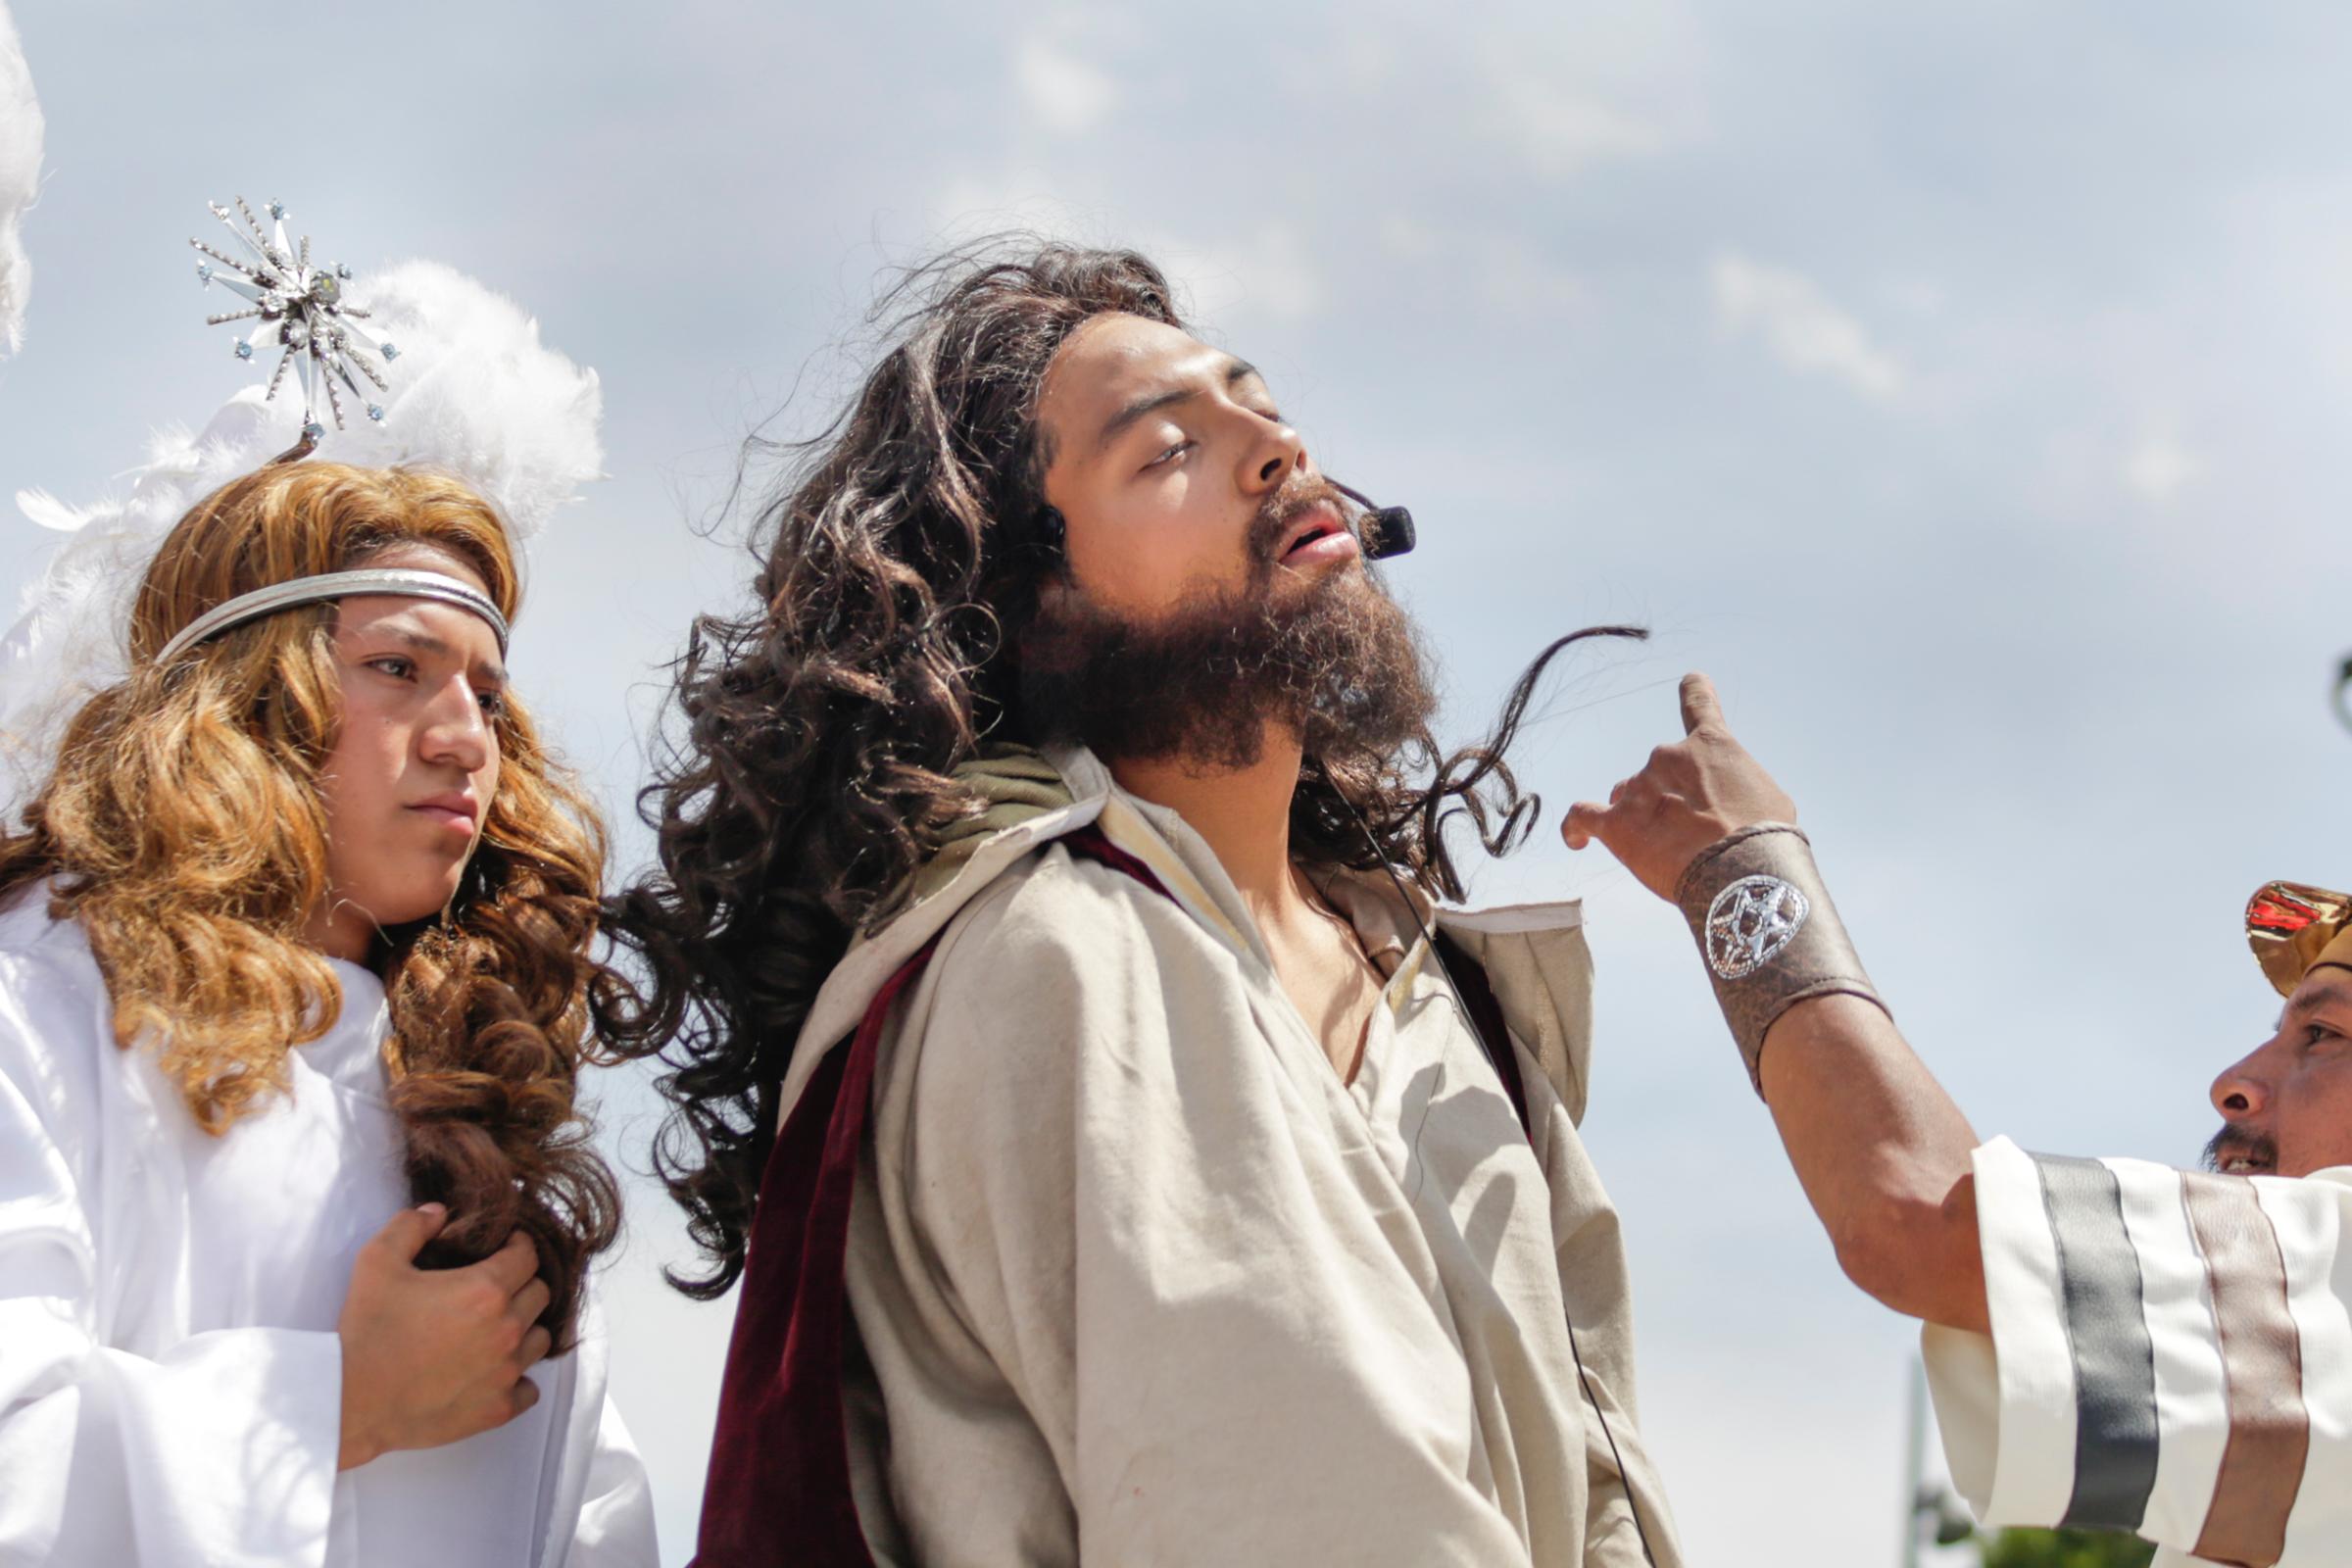 A non- professional actor playing the role of Christ is photographed with other two in the roles of ad angel and a Roman soldier during the Crucifixion of Jesus for the Holy Week celebrations in Iztapalapa, Mexico. The actor chosen to play Christ goes through a year of spiritual and physical training before being able to perform. In Mexico many communities stage processions for Good Friday. The Mexico City borough of Iztapalapa holds the largest and most elaborate of these, with up to 5,000 people participating and 150 of these with speaking roles. Its origins date back to a cholera epidemic in the 19th century, which gave rise to a procession to petition relief.